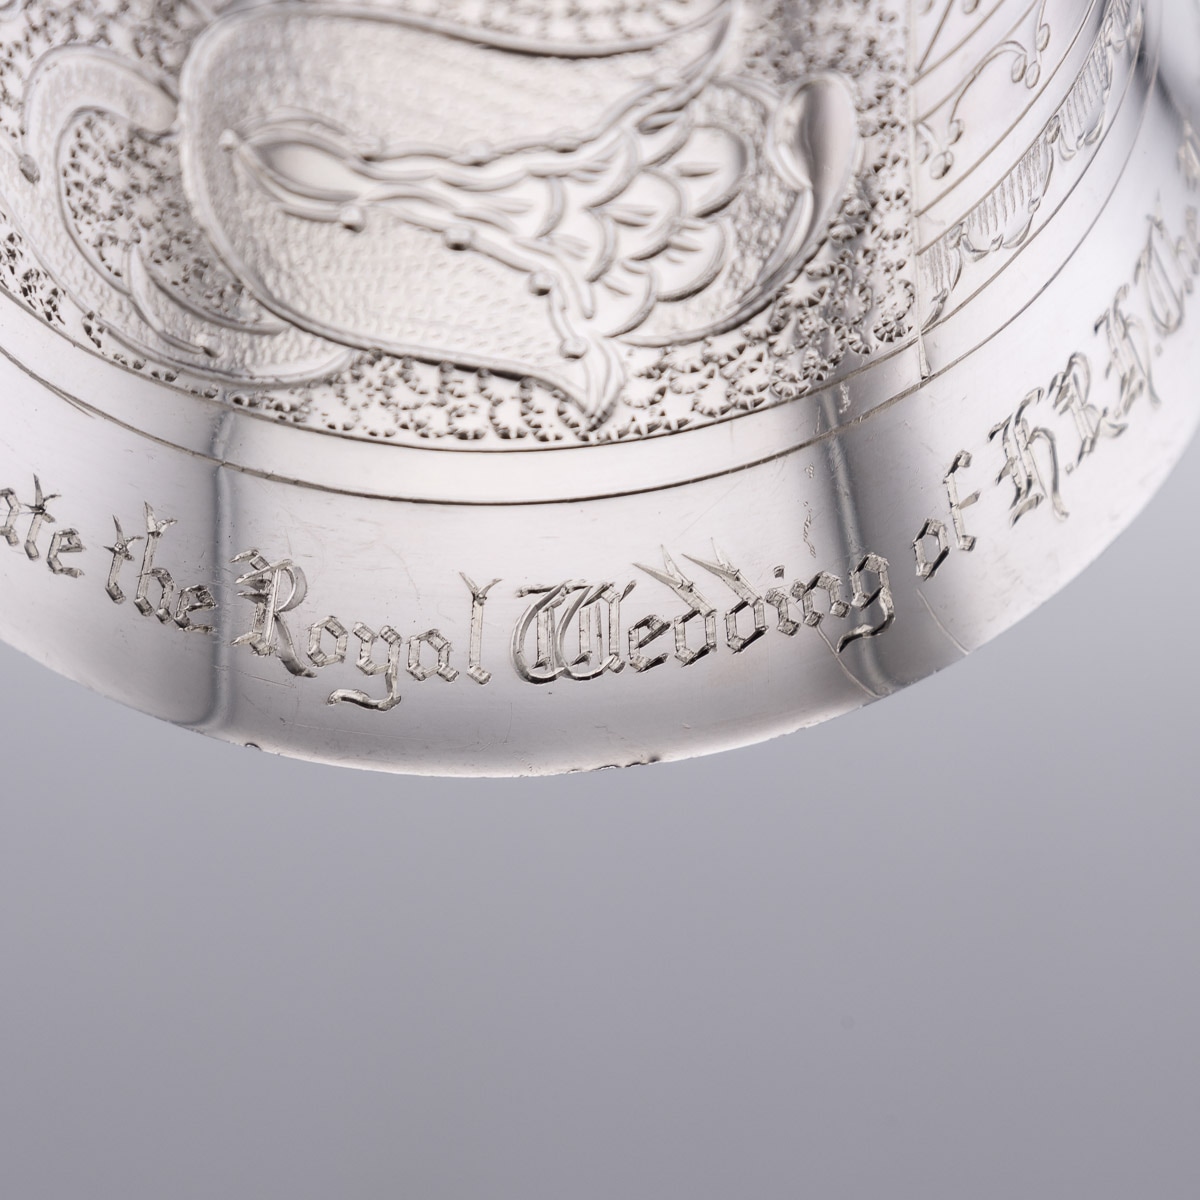 A ROYAL WEDDING SOLID STERLING SILVER NOVELTY WAGER CUP, LONDON, C. 1973 - Image 12 of 23